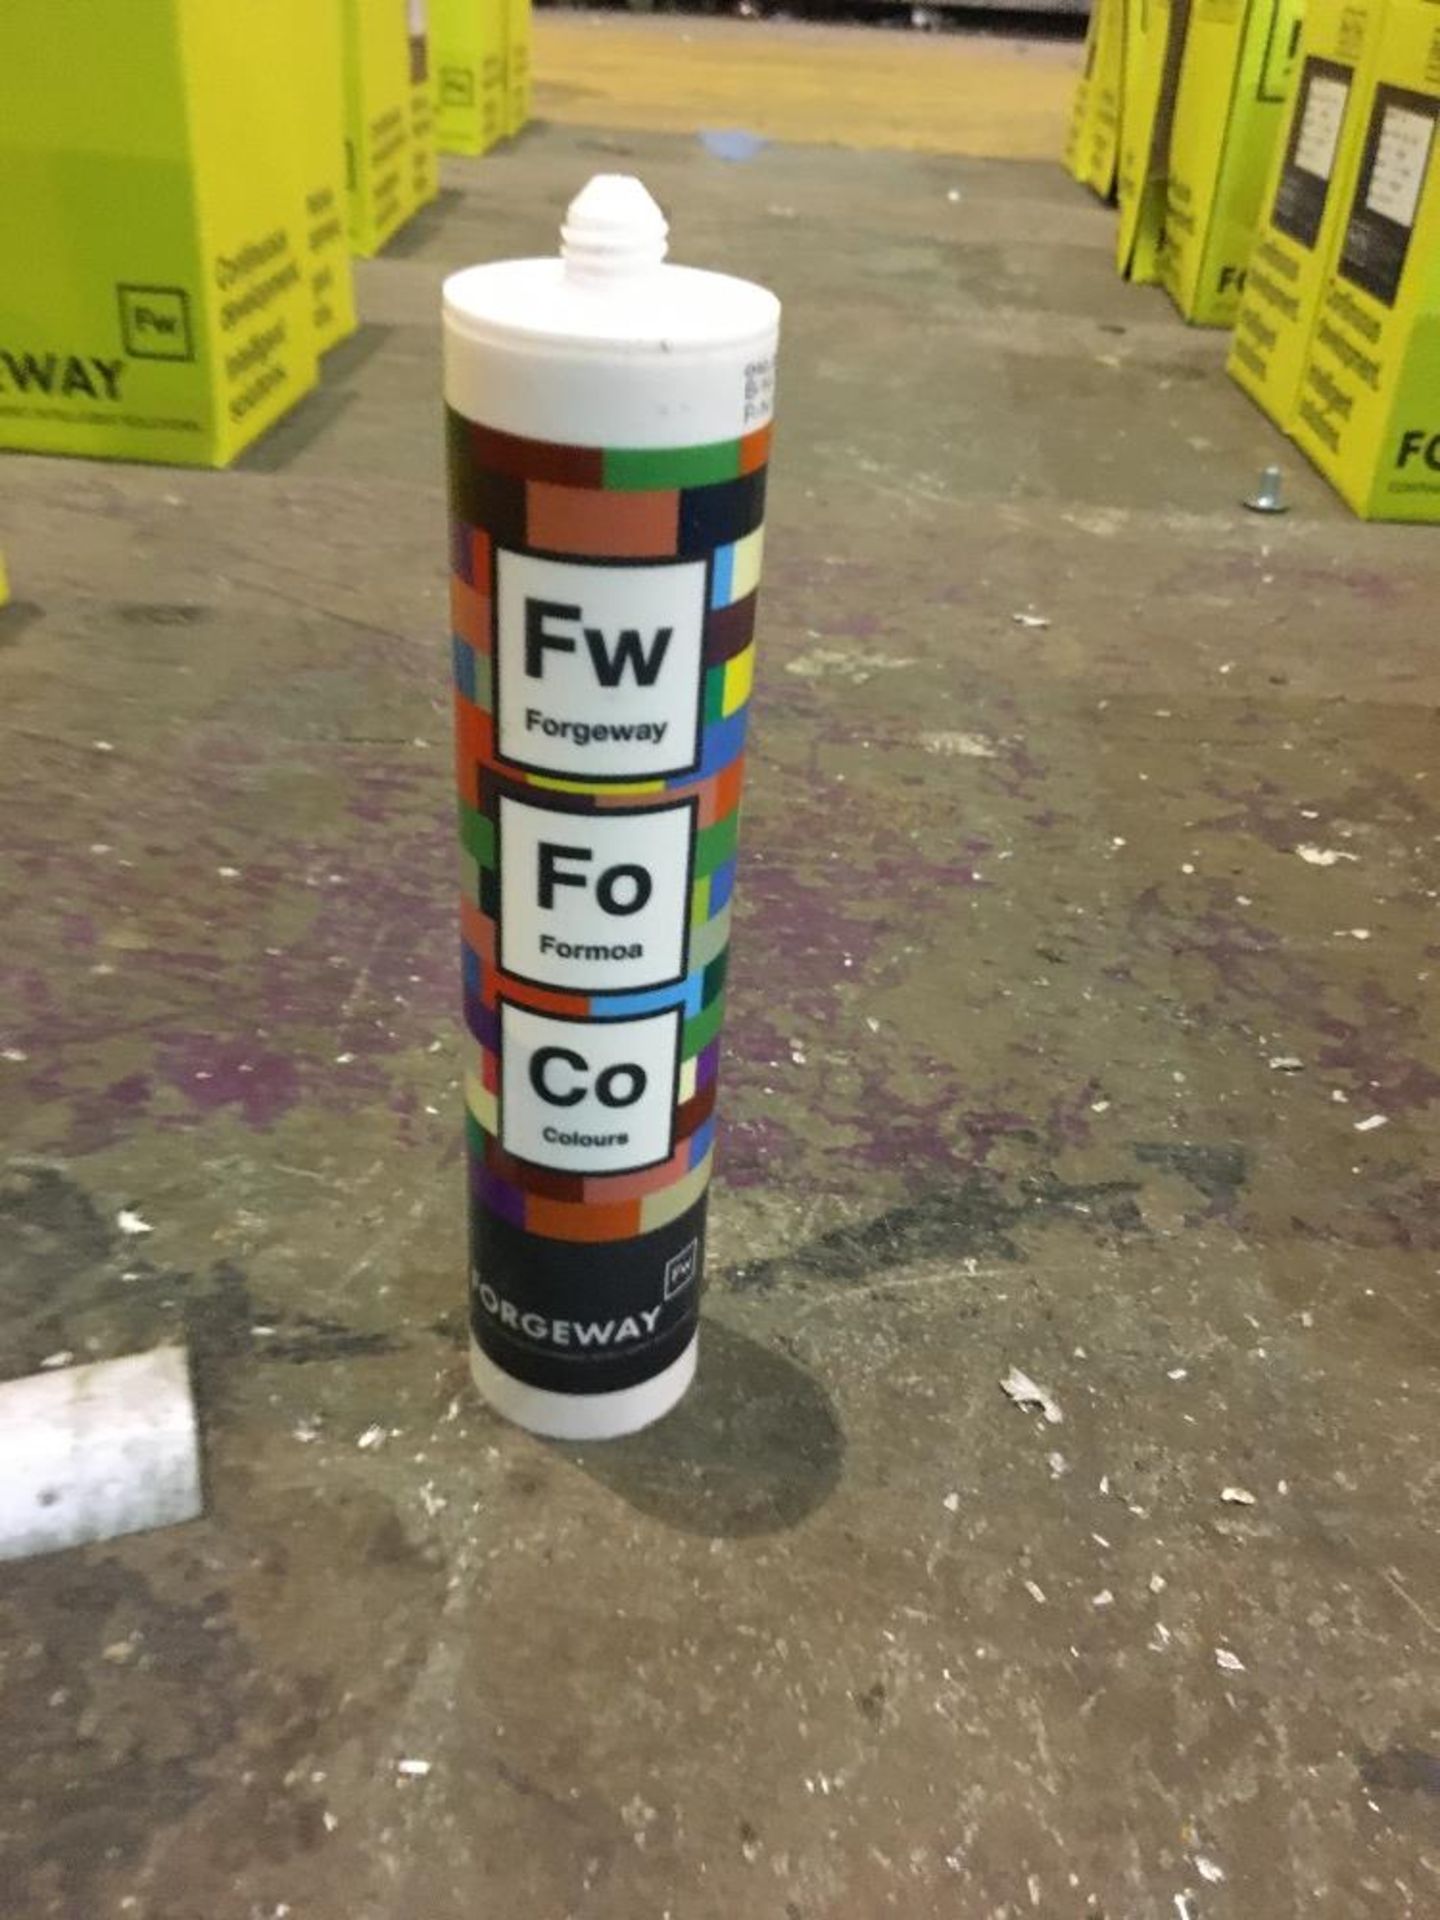 (2) FO Formoa Forgeway adhesive/sealant open boxes - Image 3 of 5